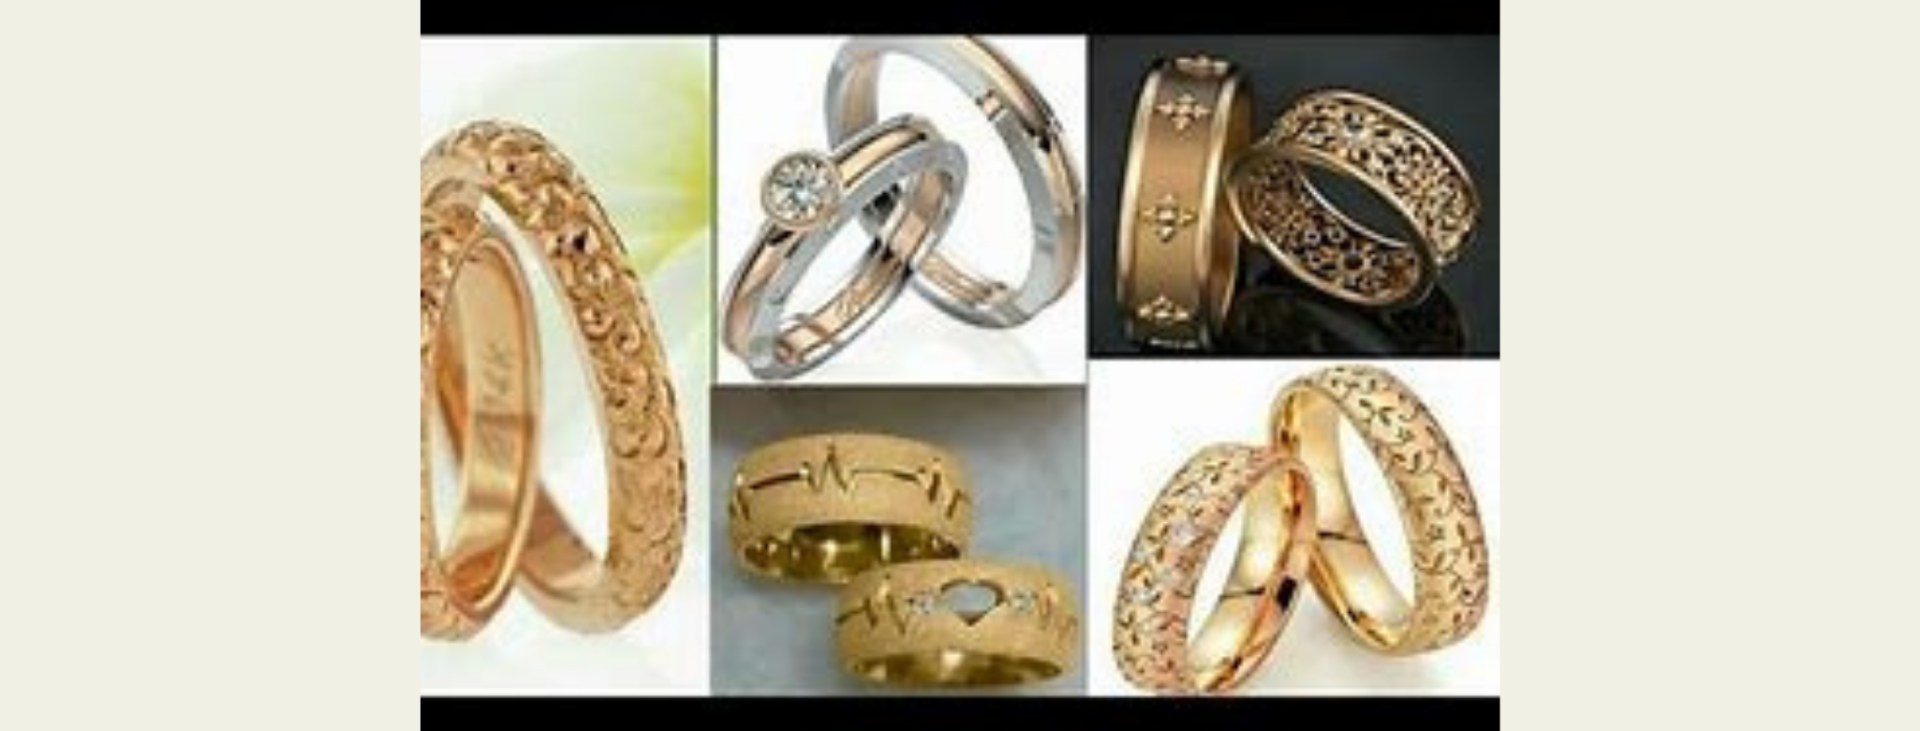 collection of wedding rings